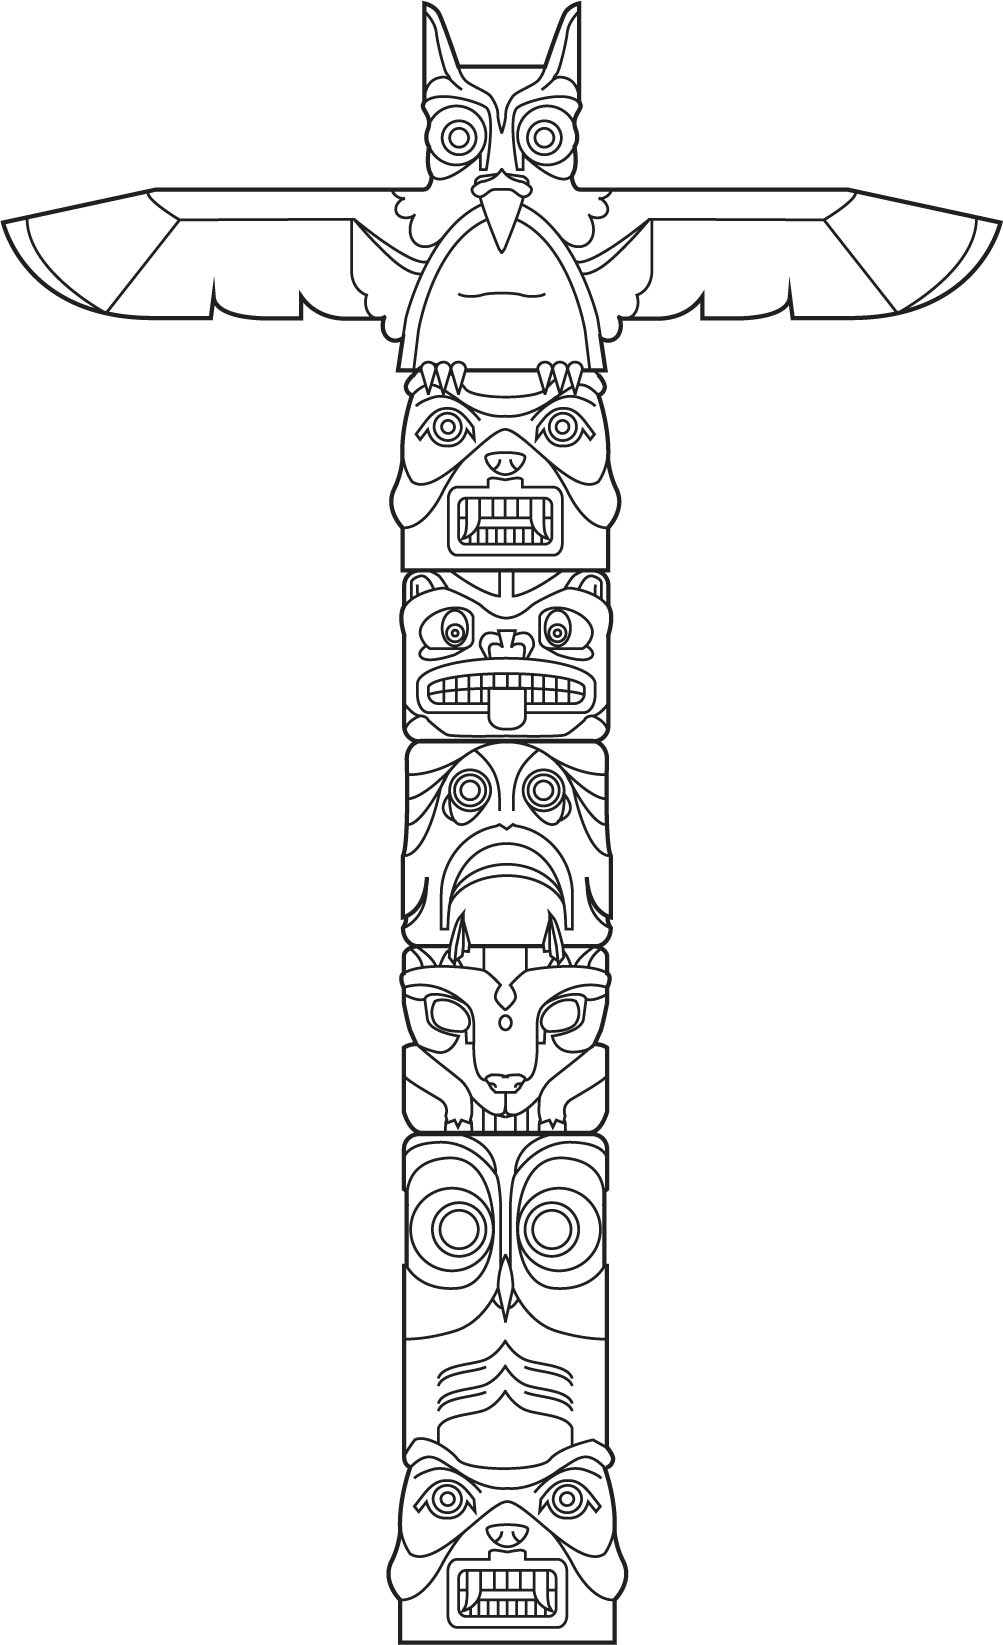 6-best-images-of-printable-native-american-totem-poles-totem-poles-printable-native-american